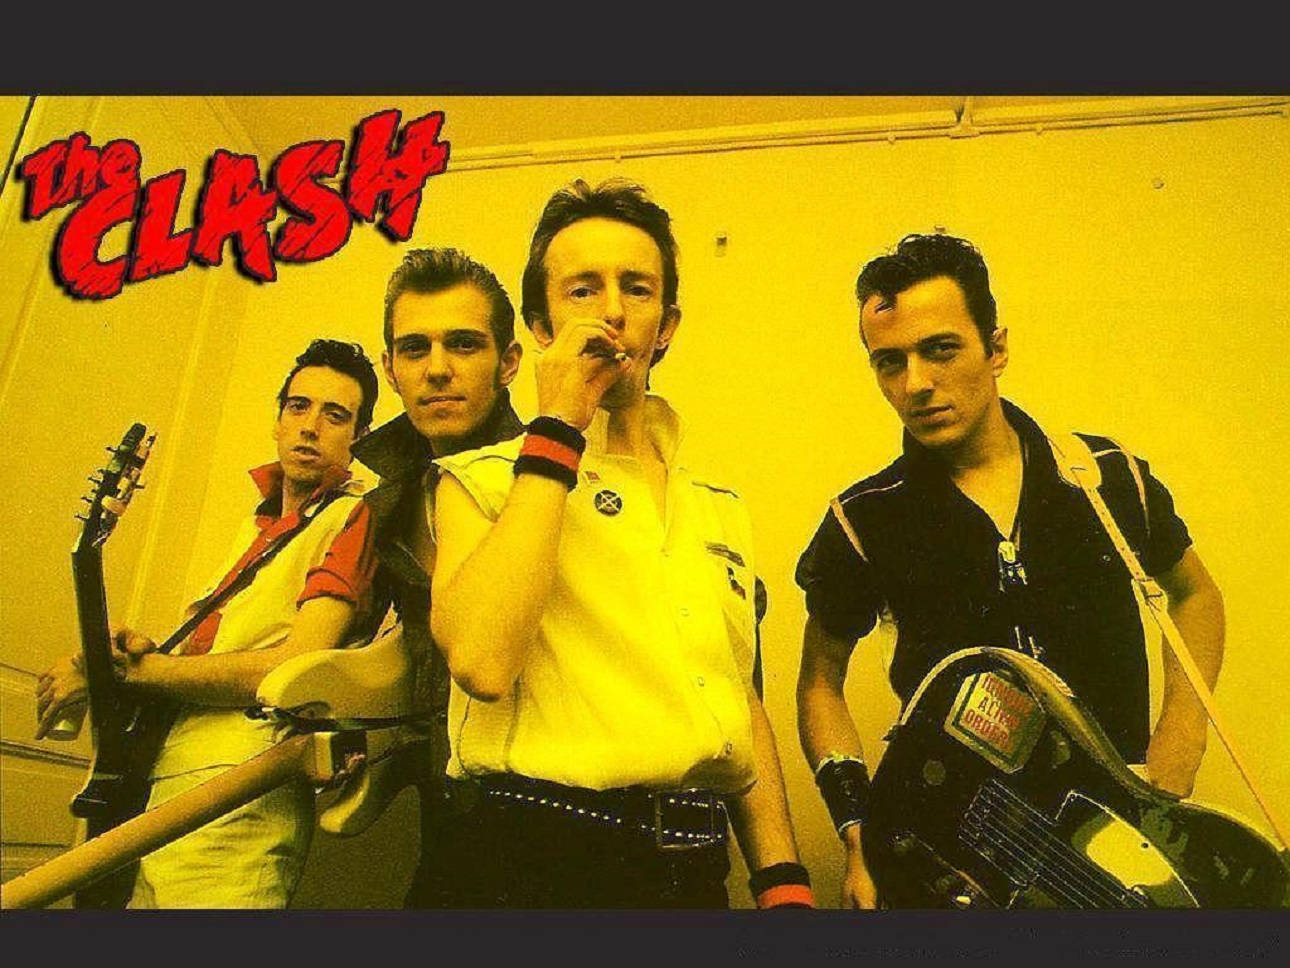 The Clash New York City Concert 1979 Poster Wallpaper